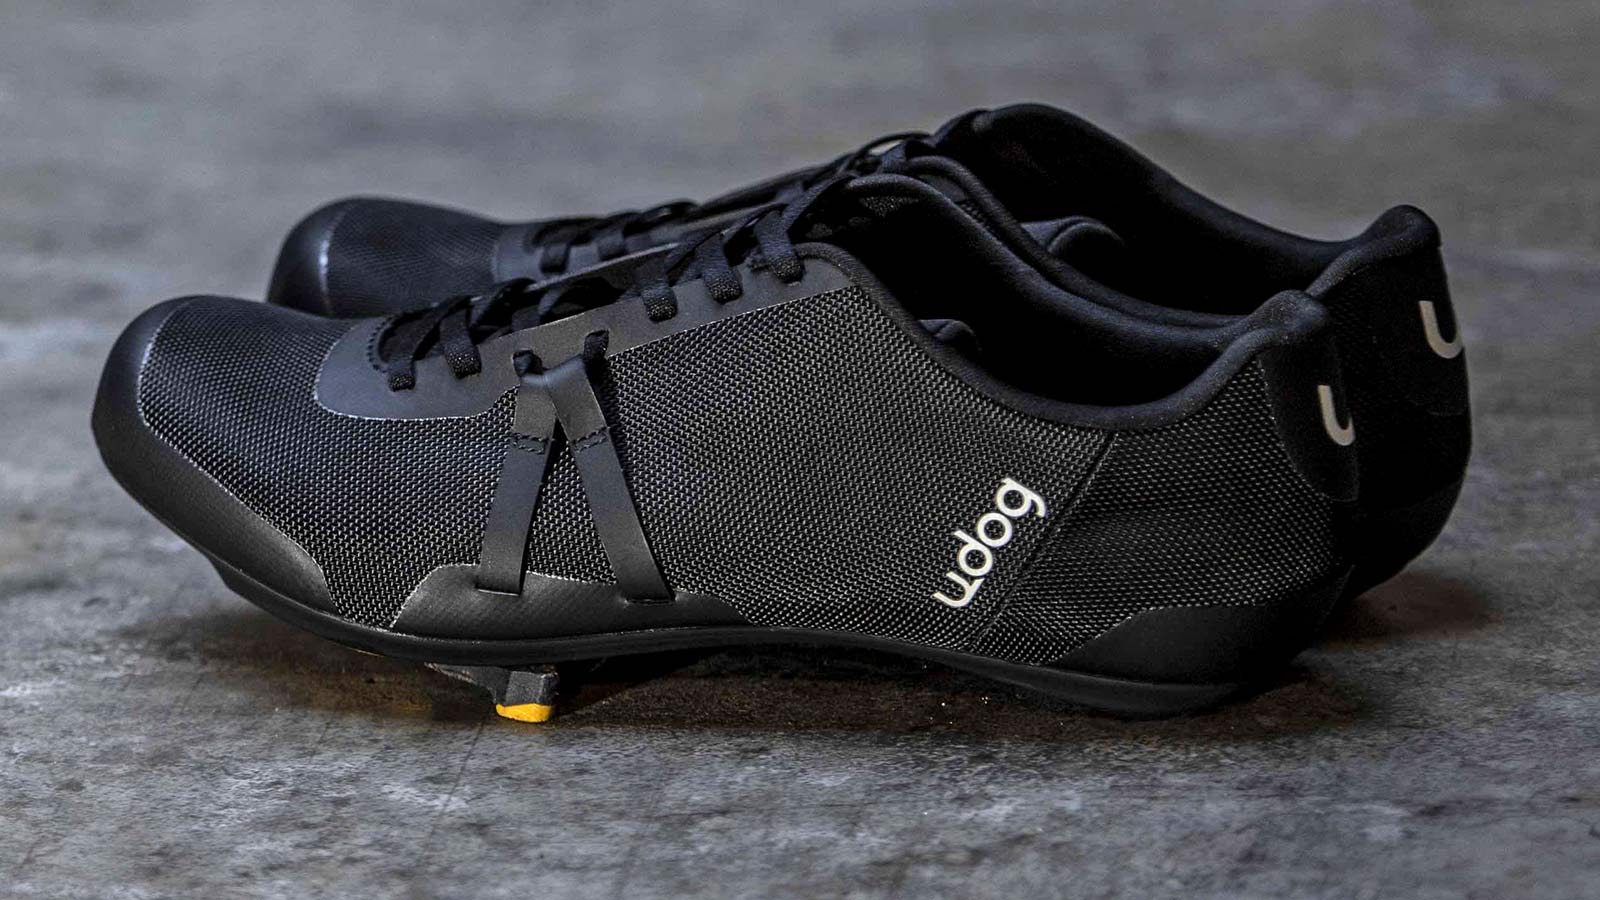 Udog Tensione road shoes, startup lightweight lace-up road cycling shoes, black close-up